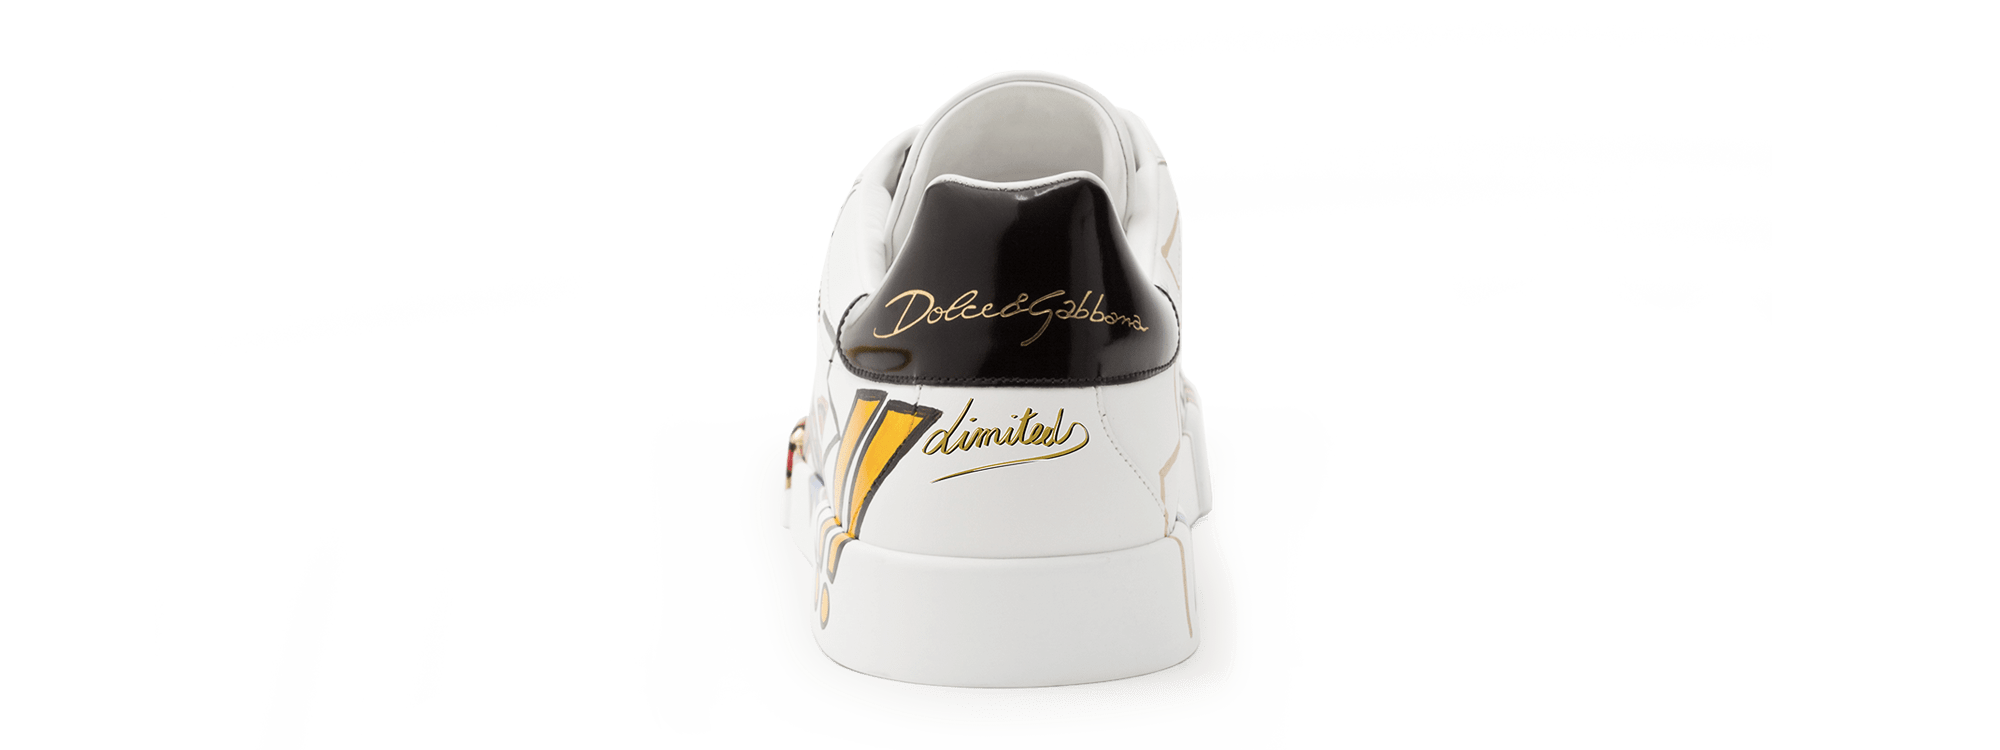 dolce gabbana limited edition shoes